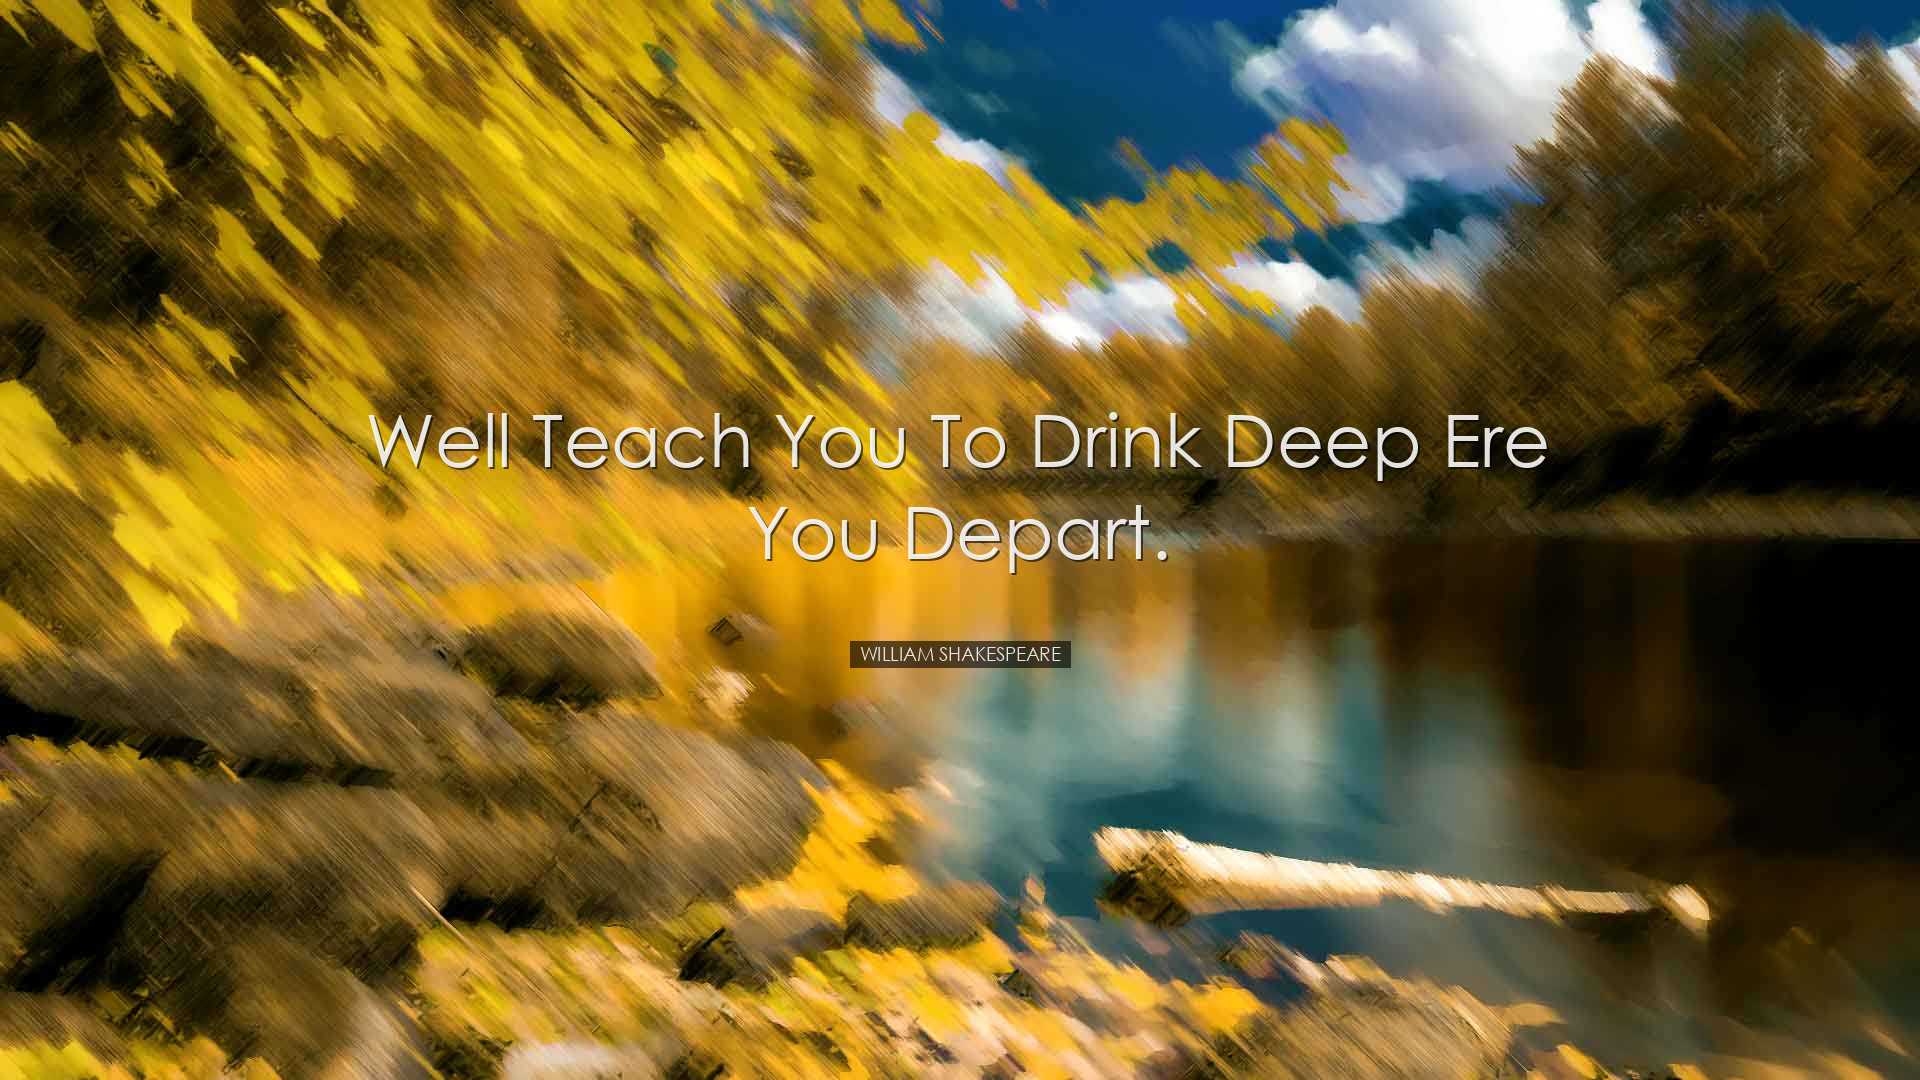 Well teach you to drink deep ere you depart. - William Shakespeare